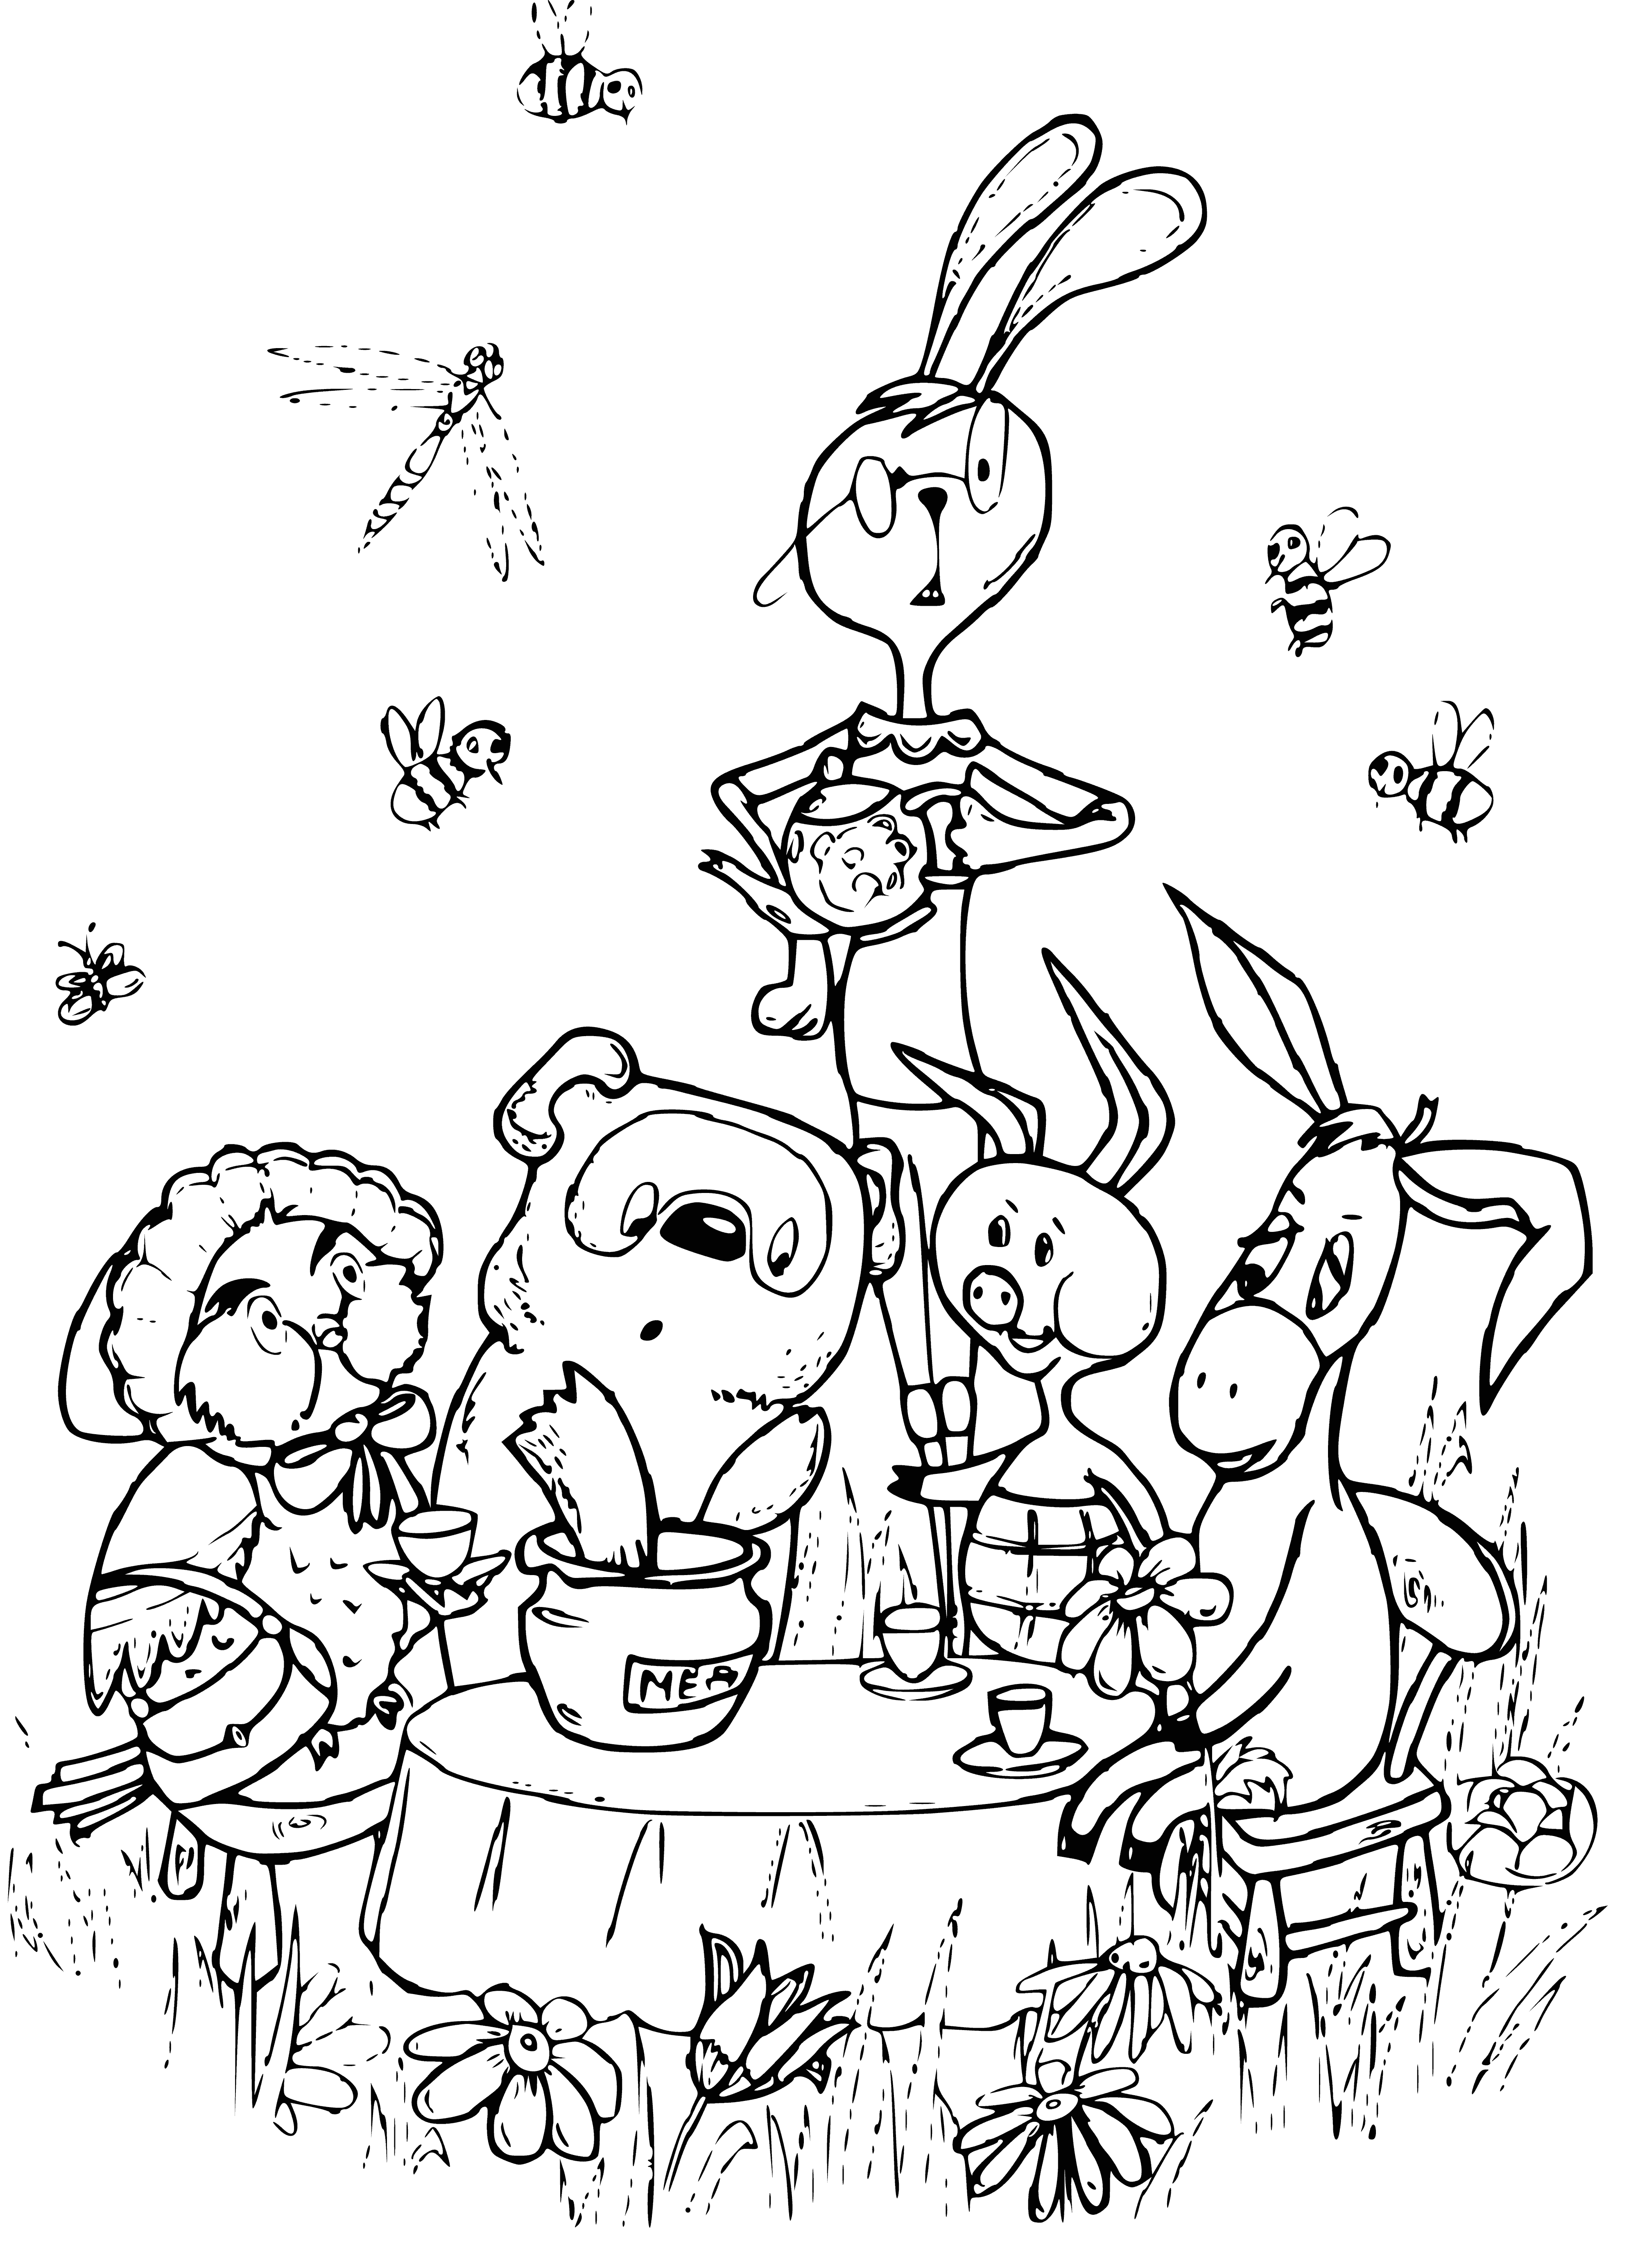 coloring page: Winnie the Pooh, a yellow bear with red shirt, black eyes & red nose, cuddles two friends - a pig & yellow duck - on the ground.